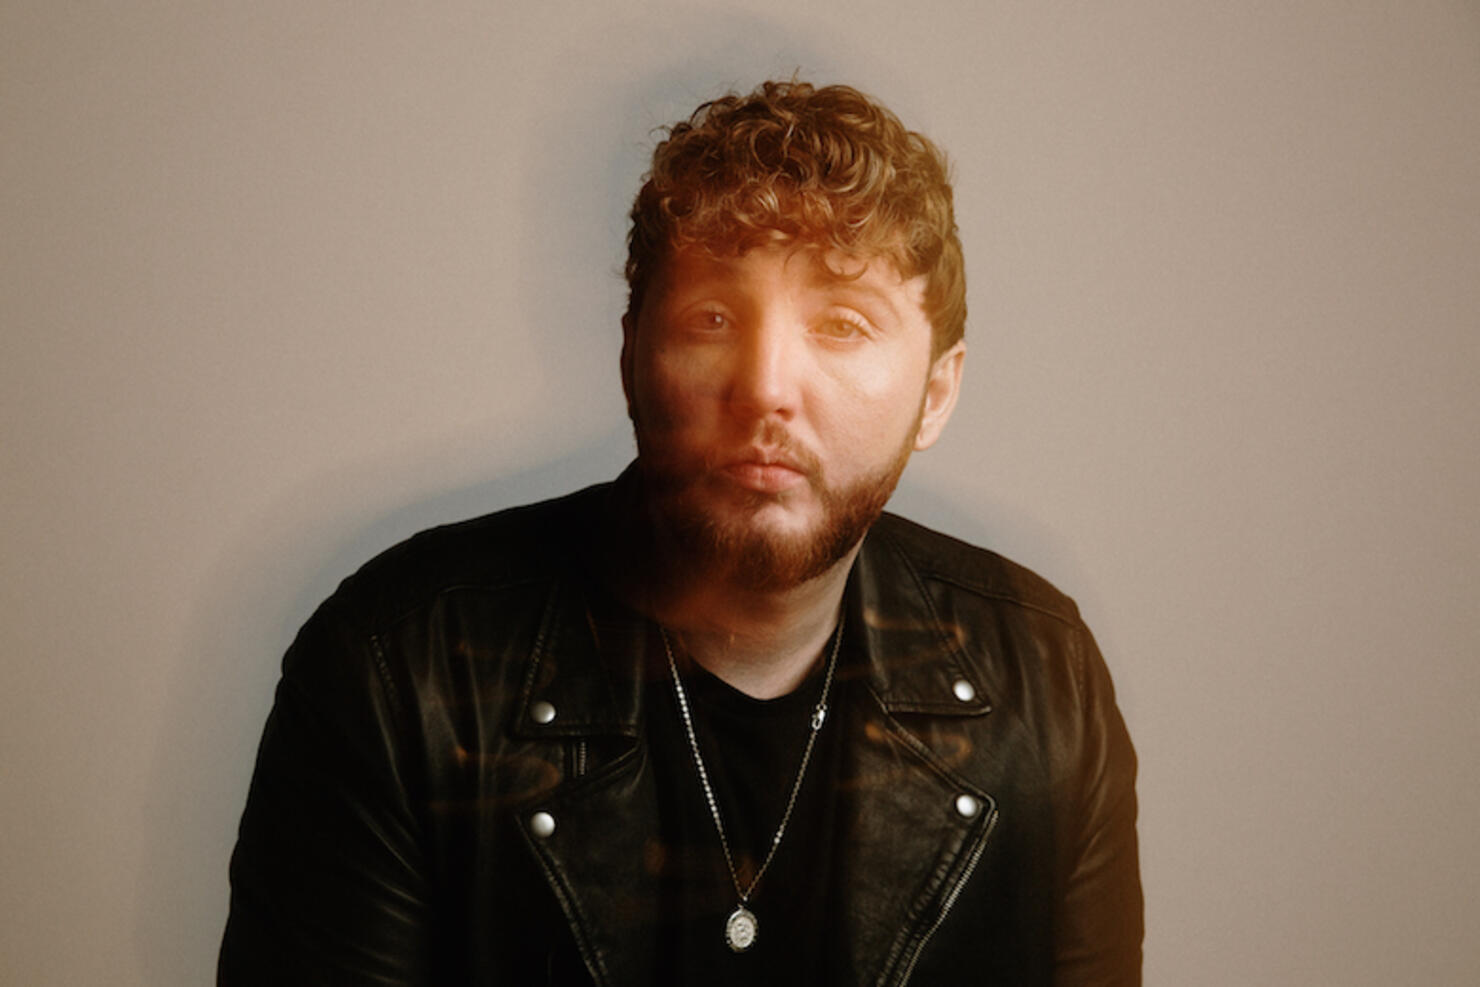 Tuesday - song and lyrics by The James Arthur Project